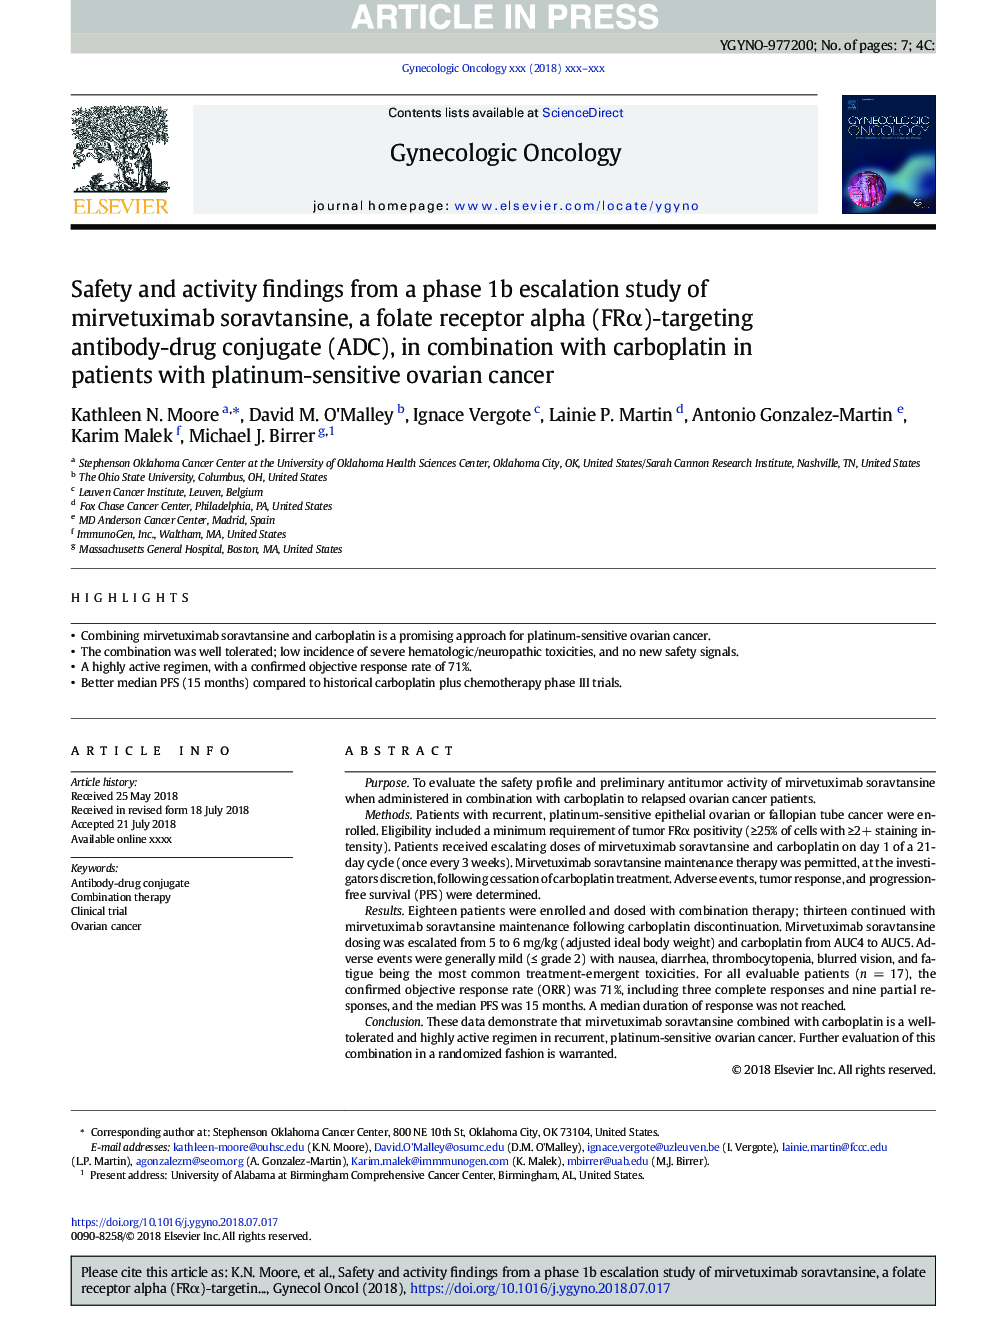 Safety and activity findings from a phase 1b escalation study of mirvetuximab soravtansine, a folate receptor alpha (FRÎ±)-targeting antibody-drug conjugate (ADC), in combination with carboplatin in patients with platinum-sensitive ovarian cancer